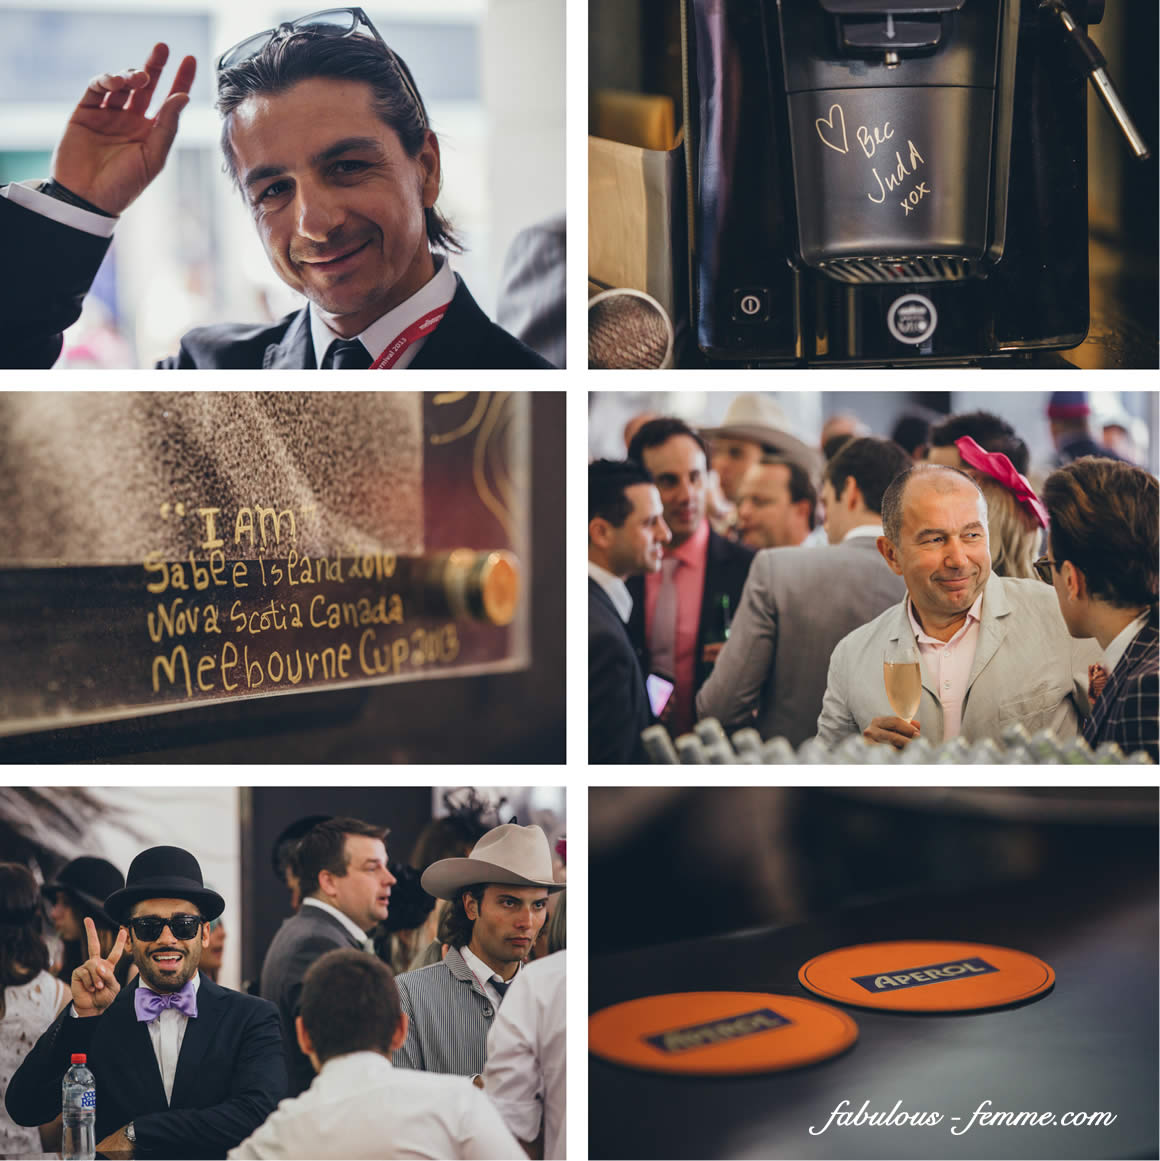 the lavazza marquee at the melbourne cup 2014